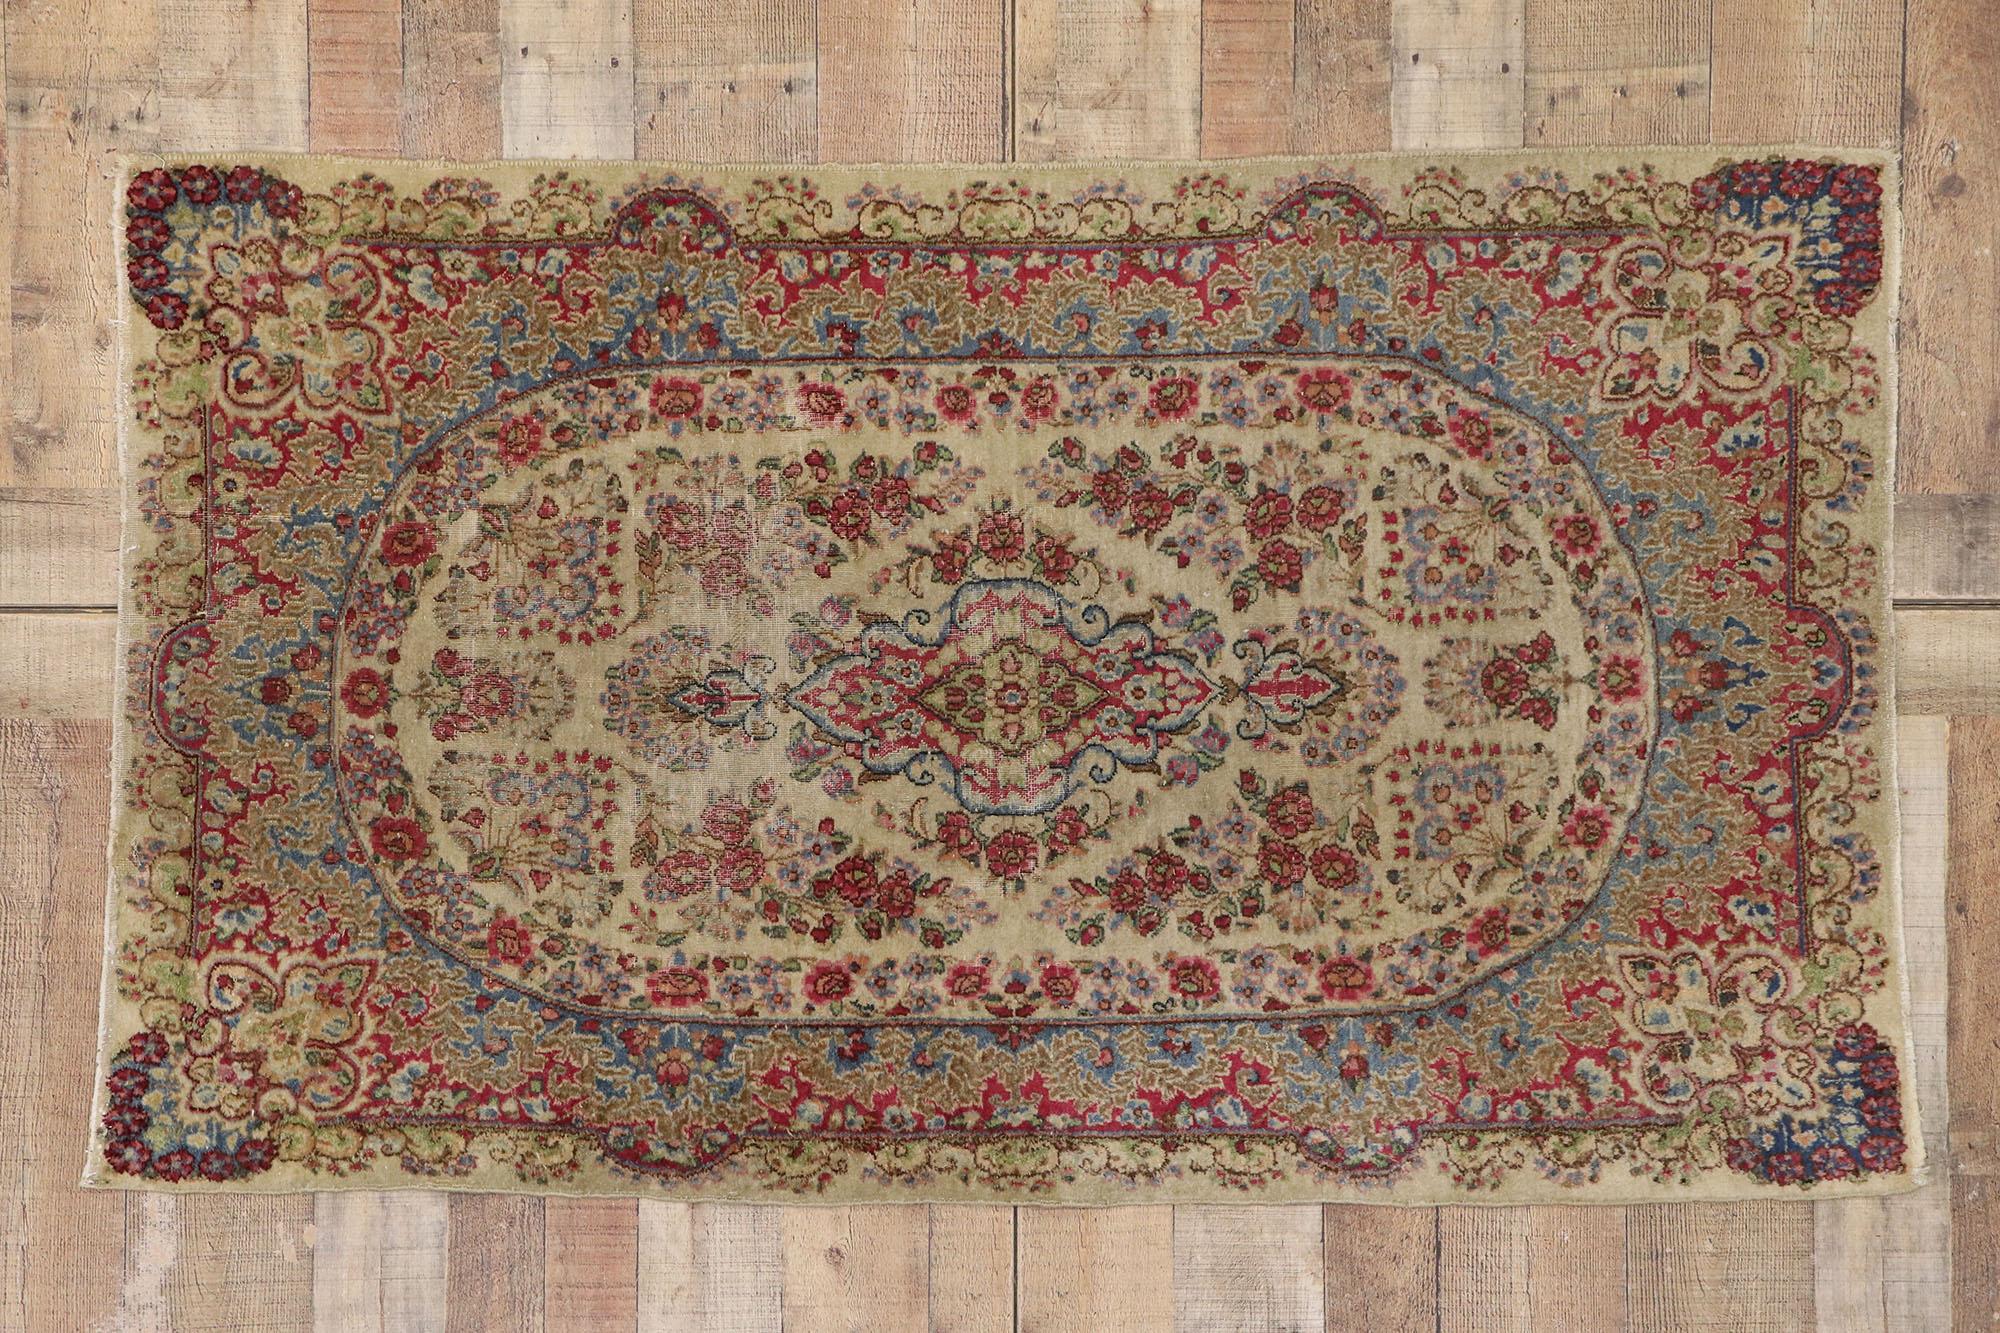 77560 distressed antique Persian Kerman rug with Shabby Chic Rustic French style. ??With an impressive array of realistic floral elements and a refined color palette, this hand knotted wool antique Persian Kerman rug charms with ease and beautifully